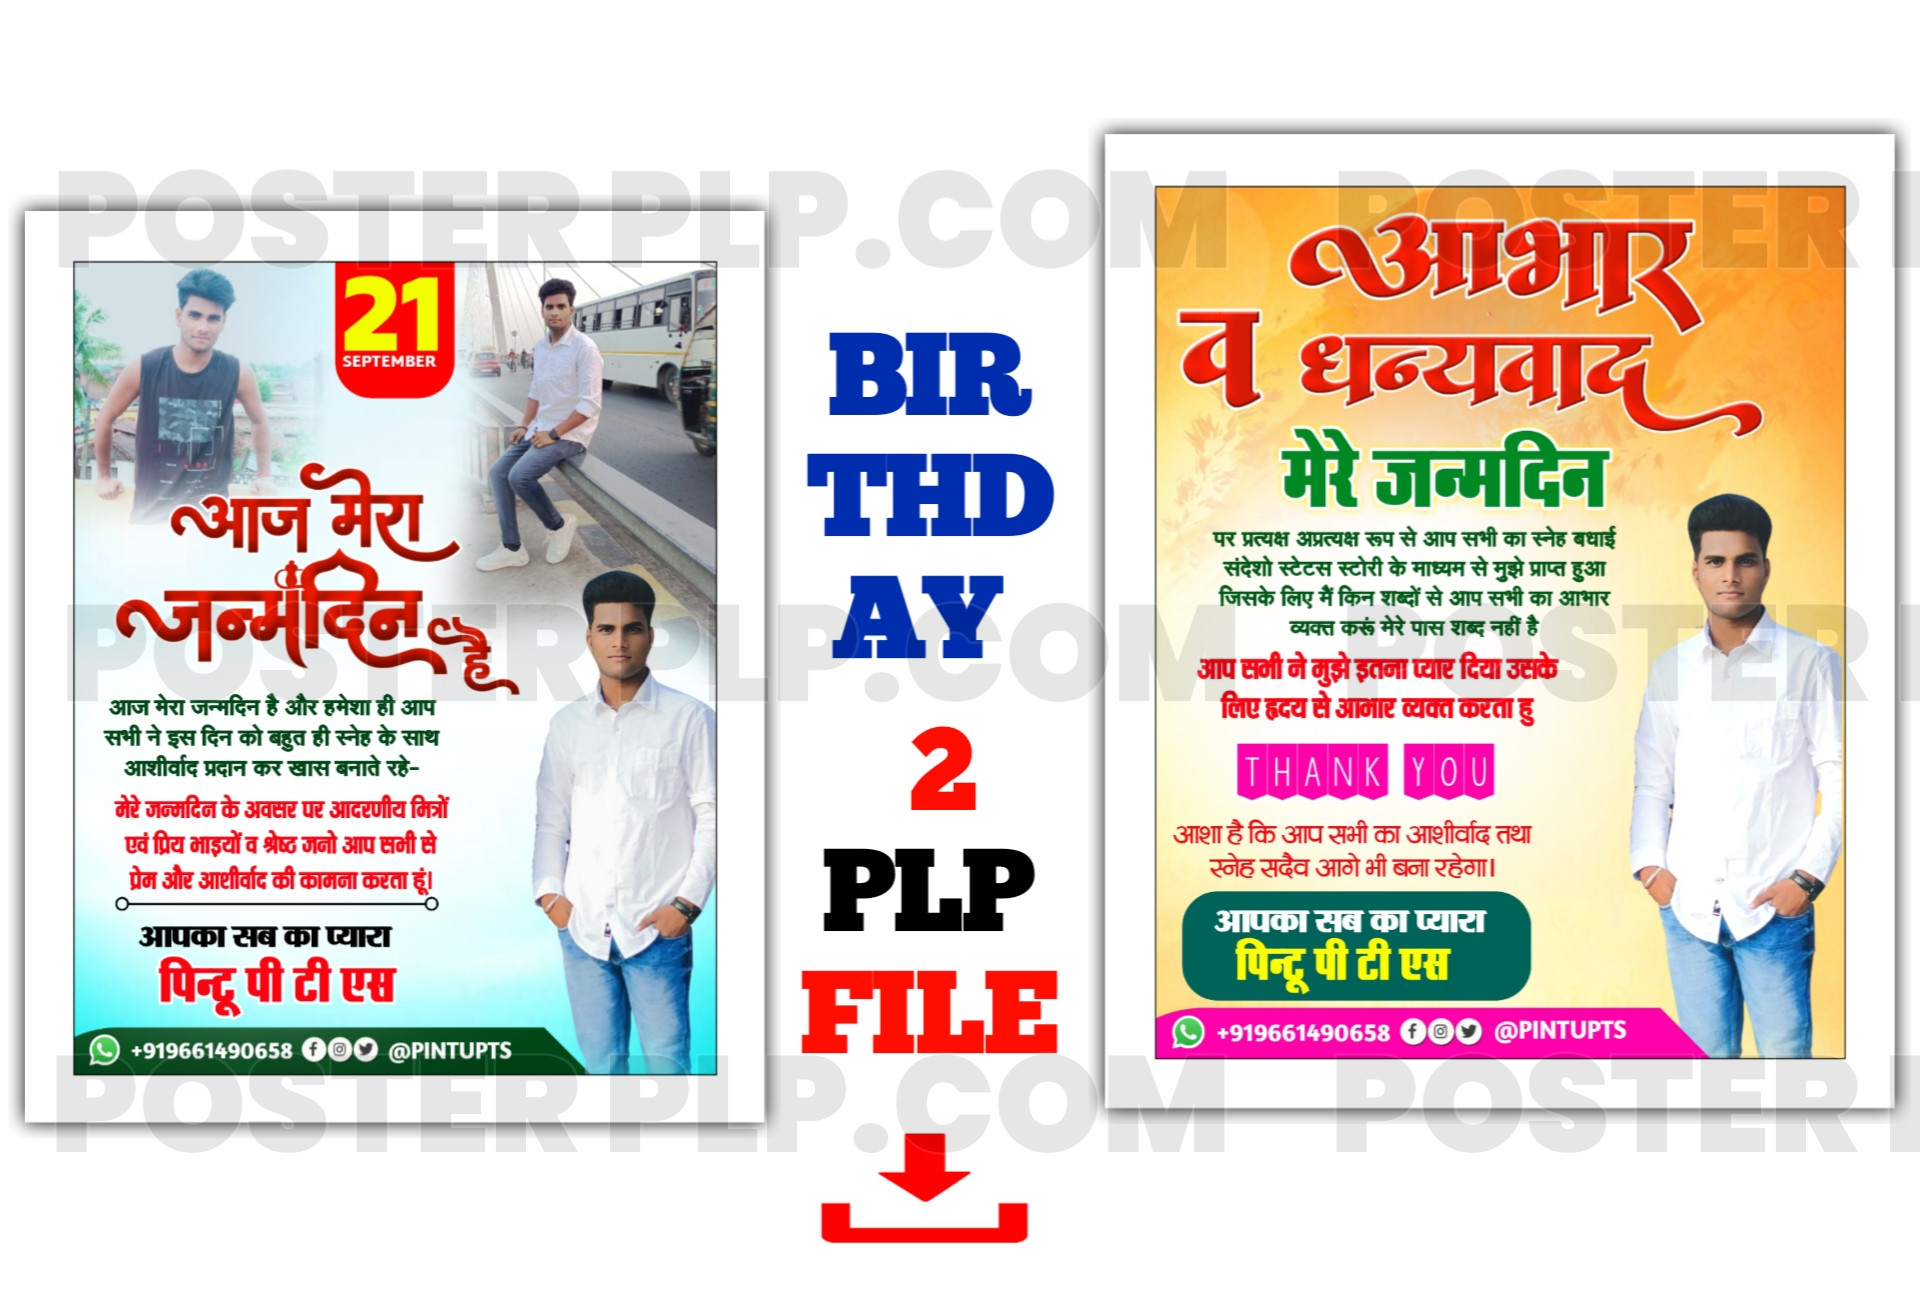 Today my birthday banner design plp file download and aabhar banner editing